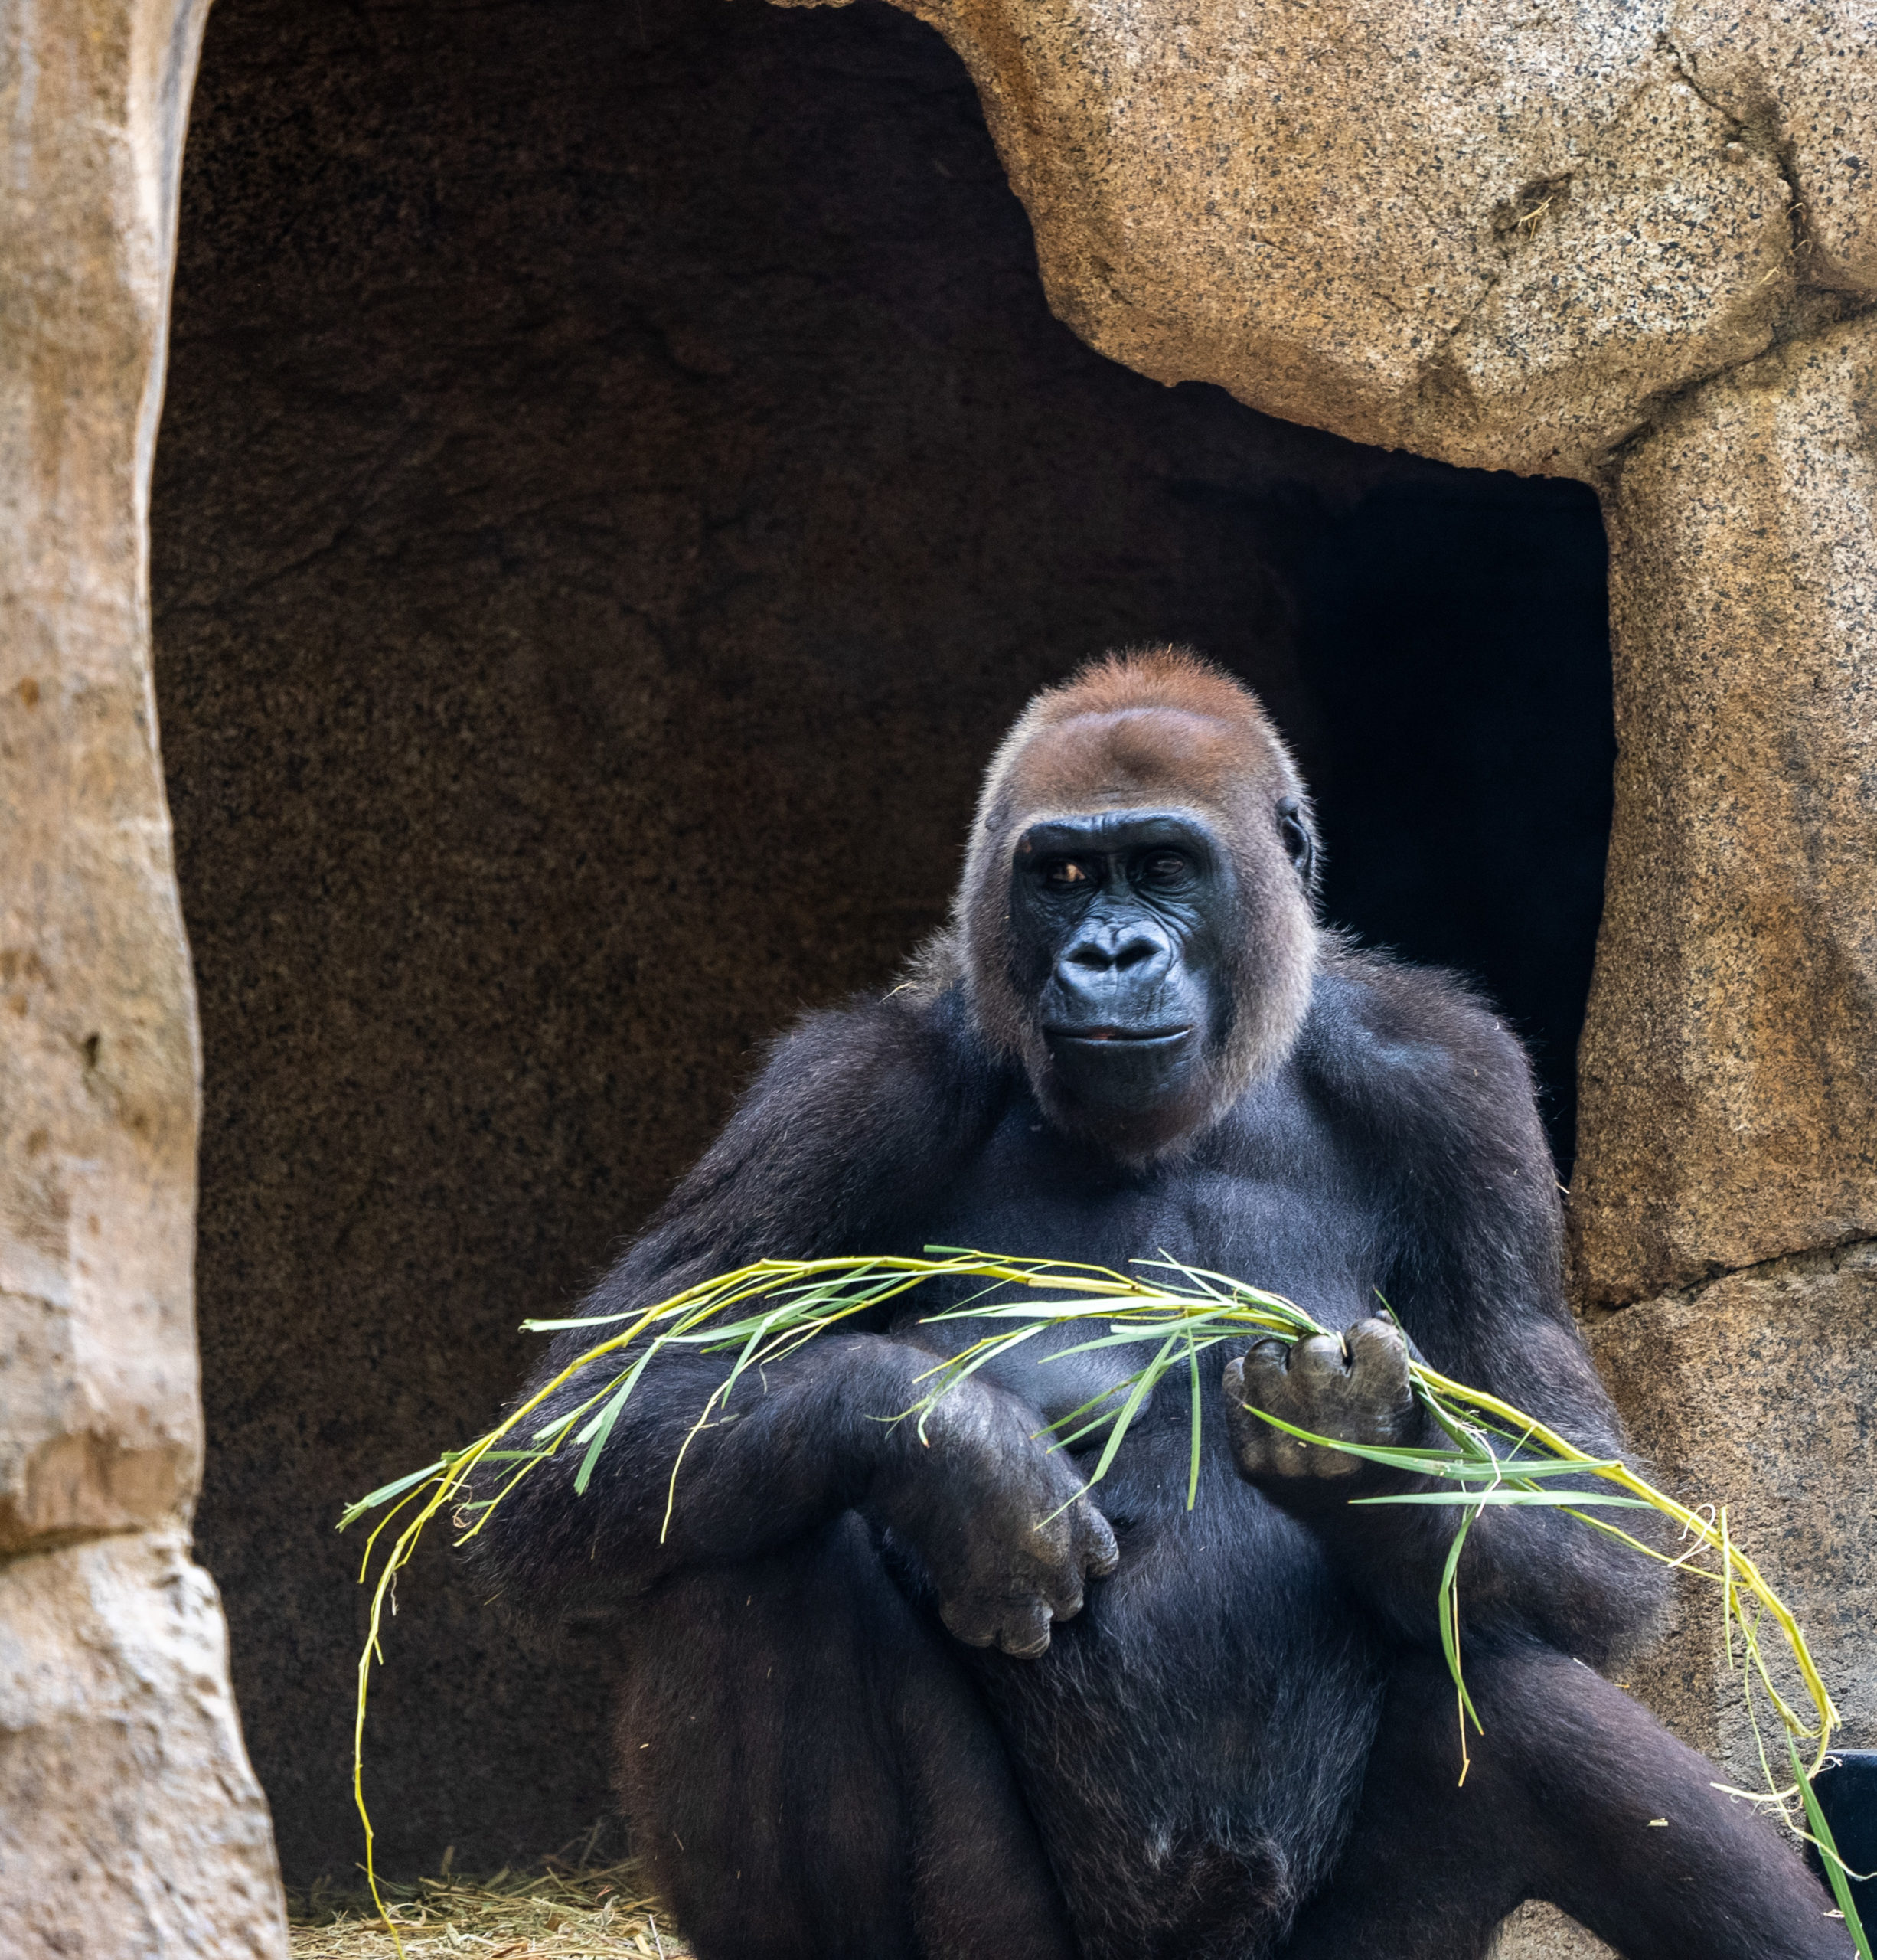 a gorilla sitting in a cave eating grass